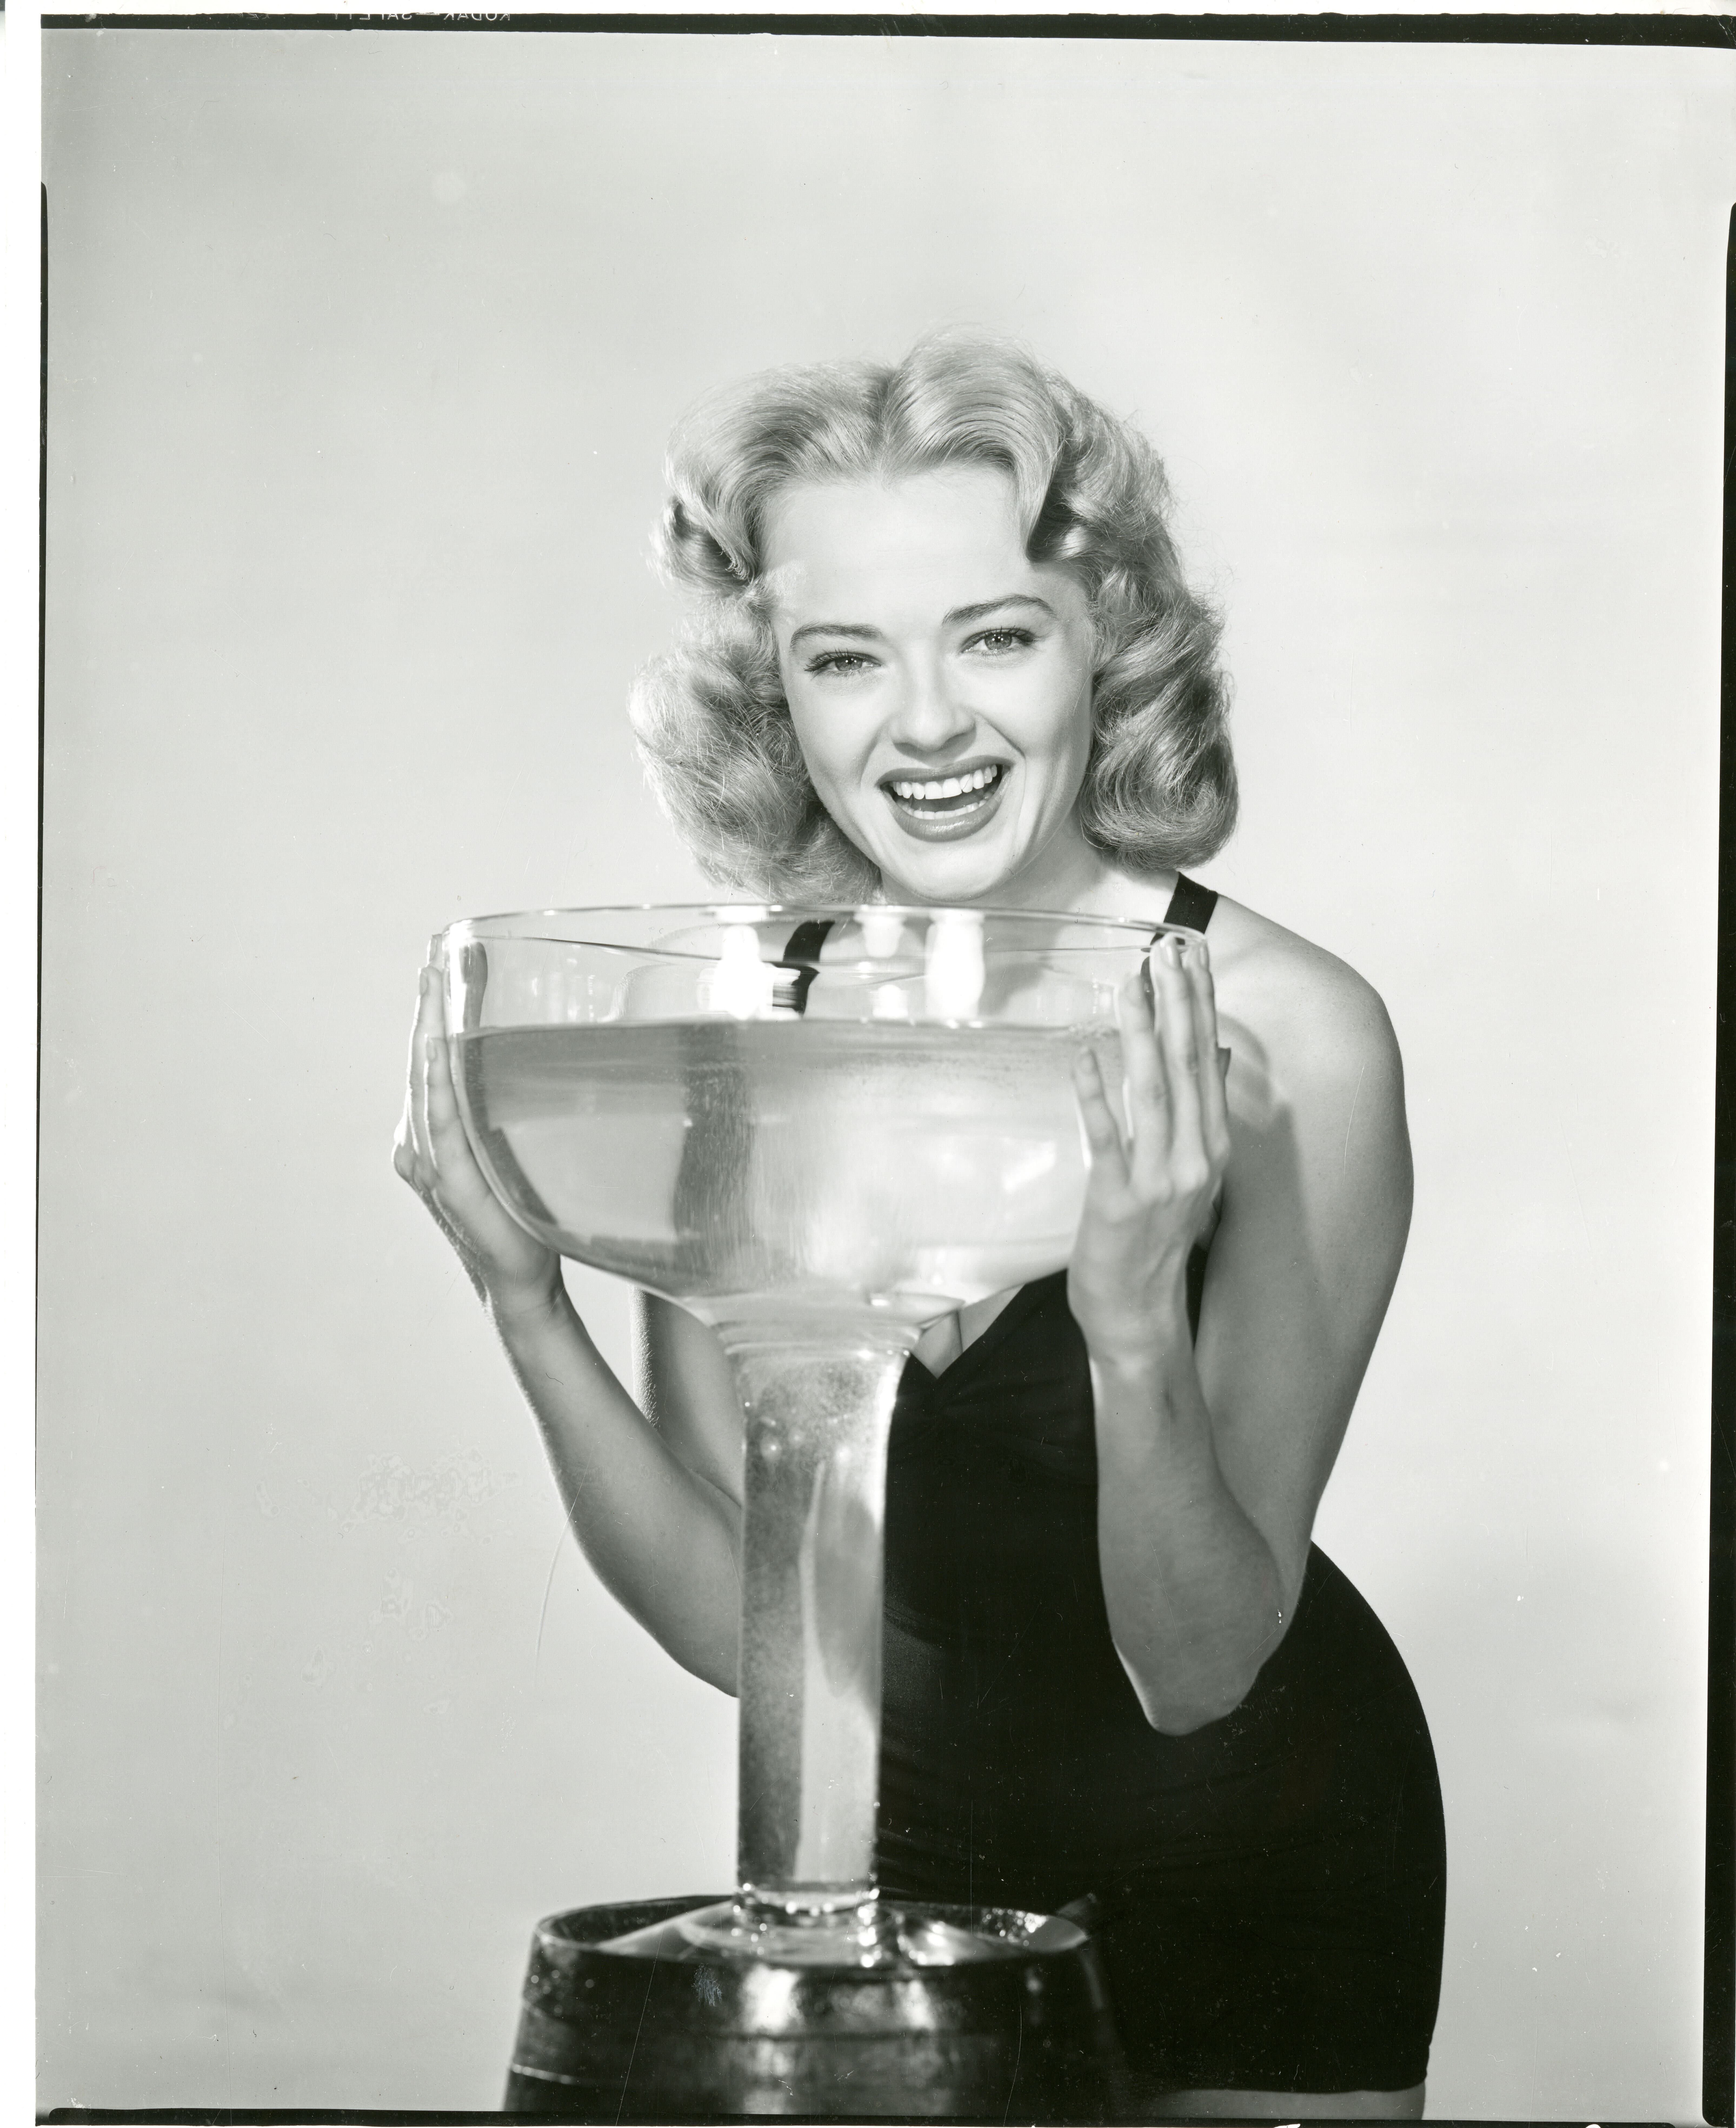 Vintage black-and-white photograph with woman and giant wine glass.